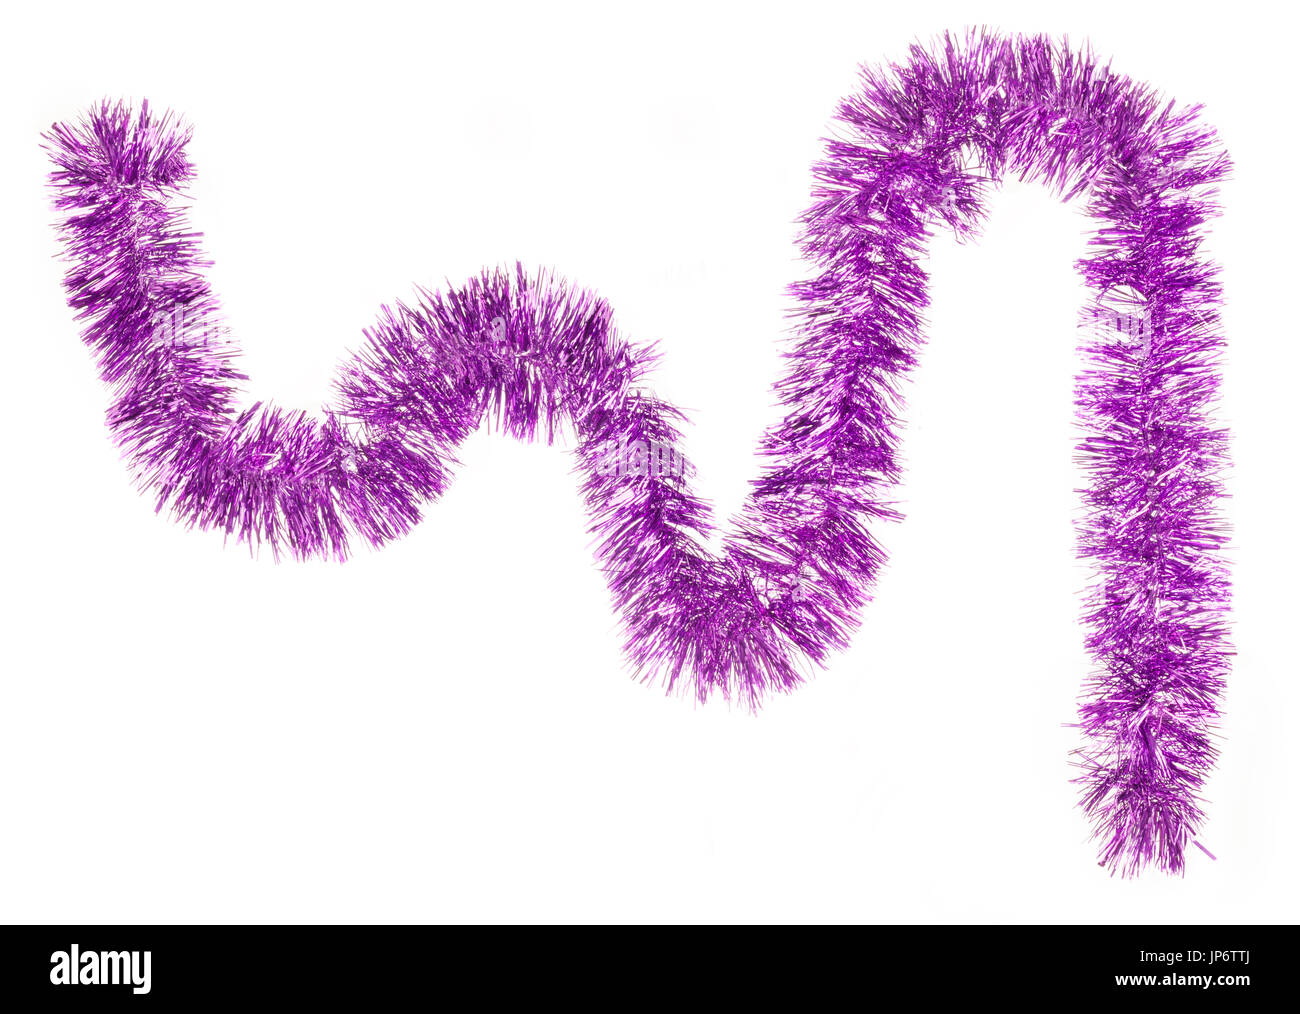 Purple color Christmas garland against white background. Stock Photo